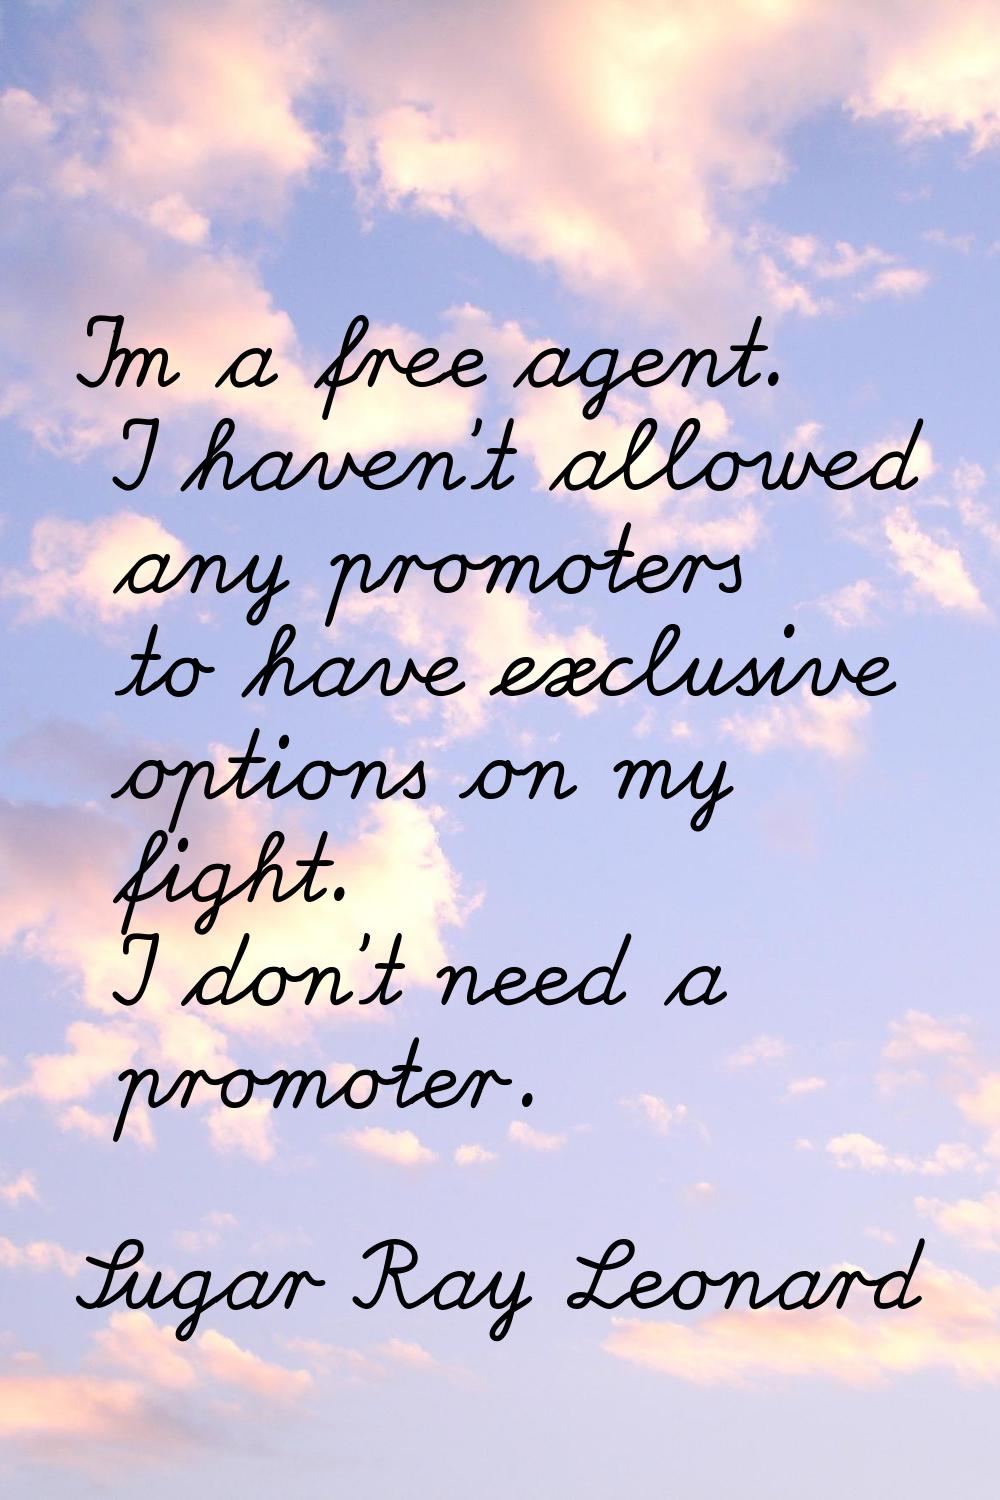 I'm a free agent. I haven't allowed any promoters to have exclusive options on my fight. I don't ne